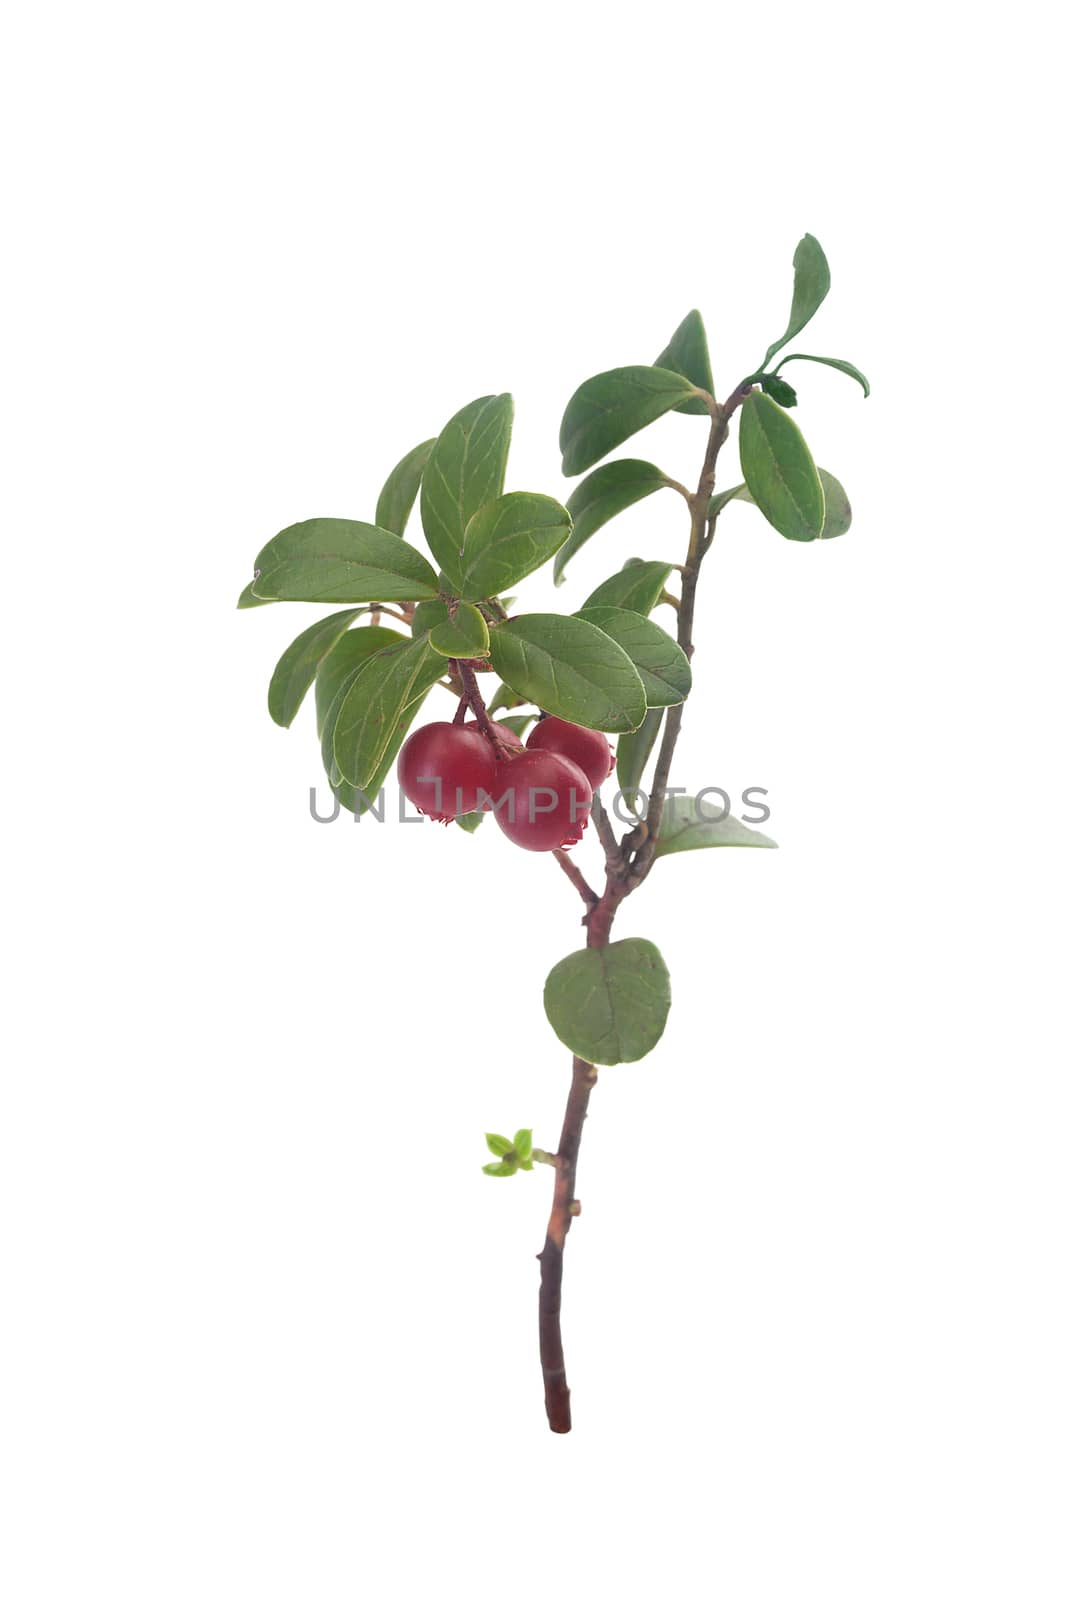 Isolated branch of cowberry with leaves and berries